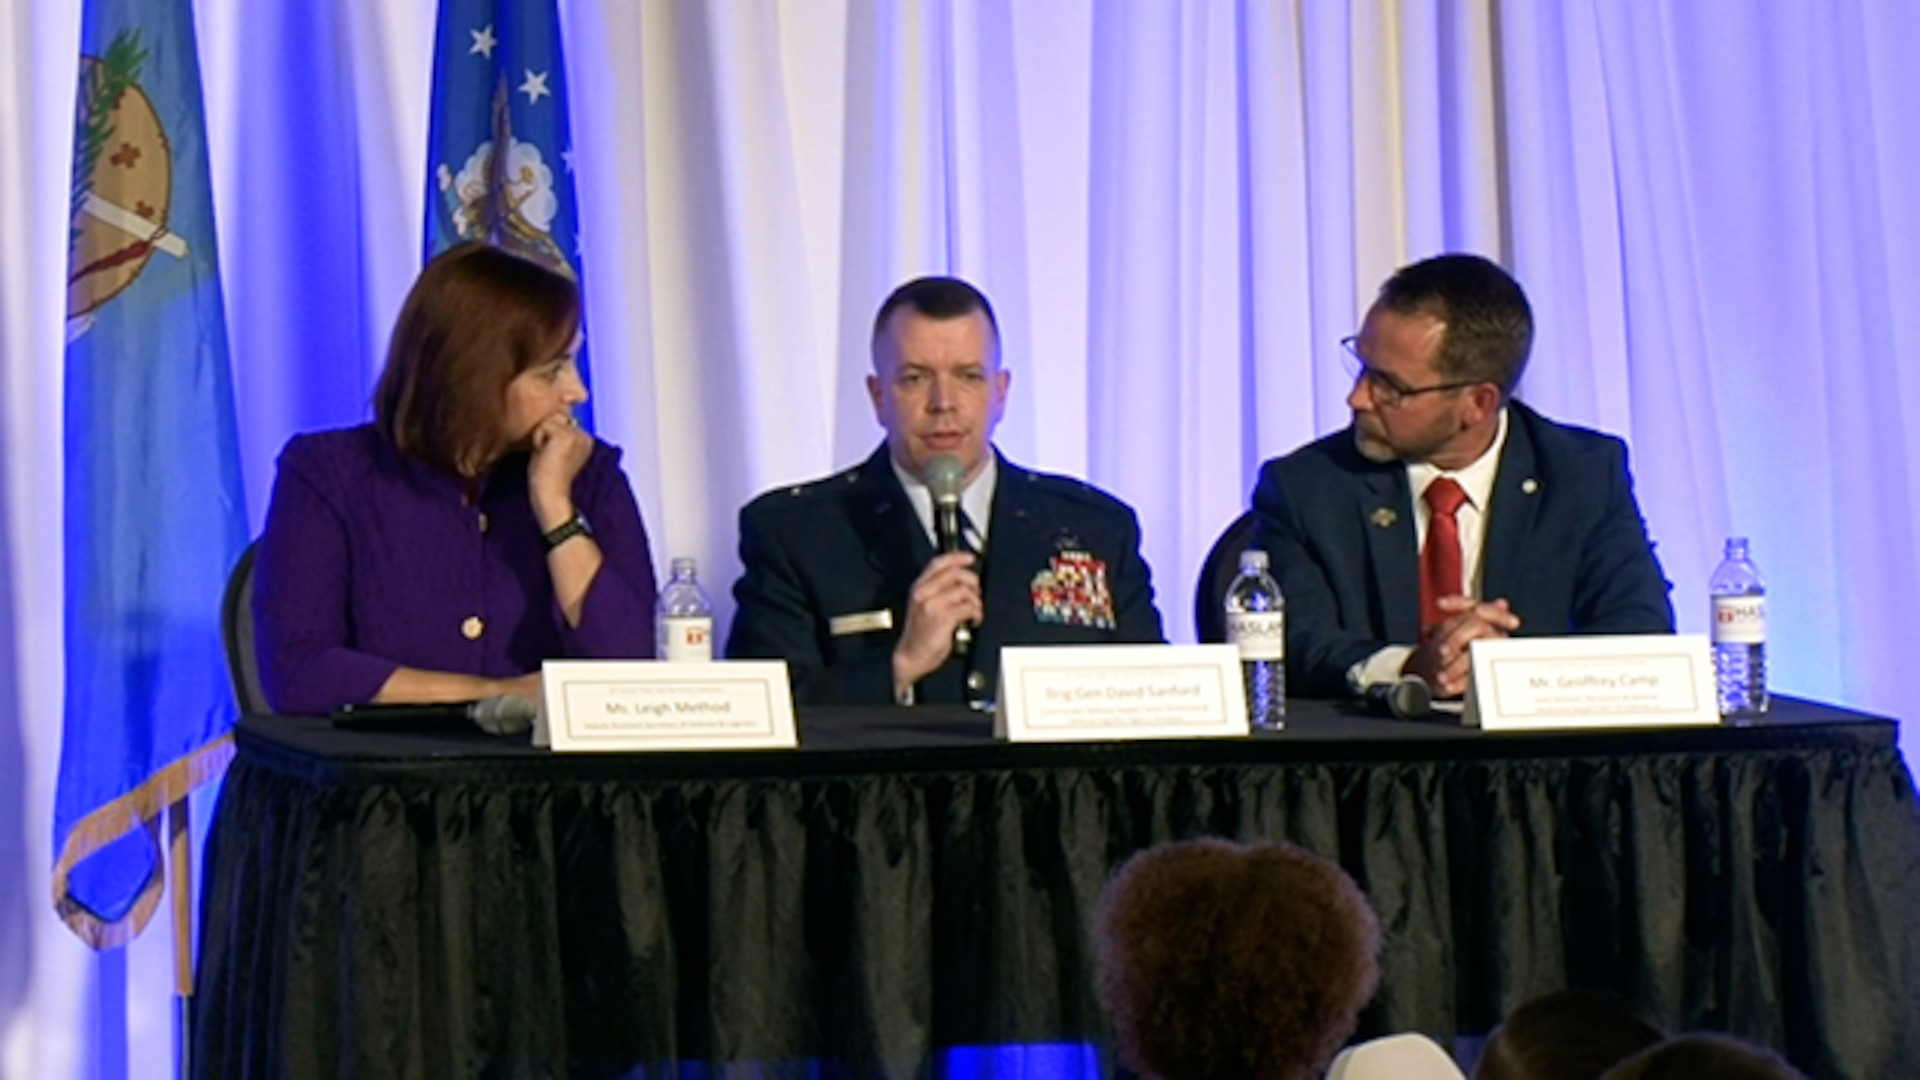 Air Force Brig. Gen. David Sanford pictured with other panel members